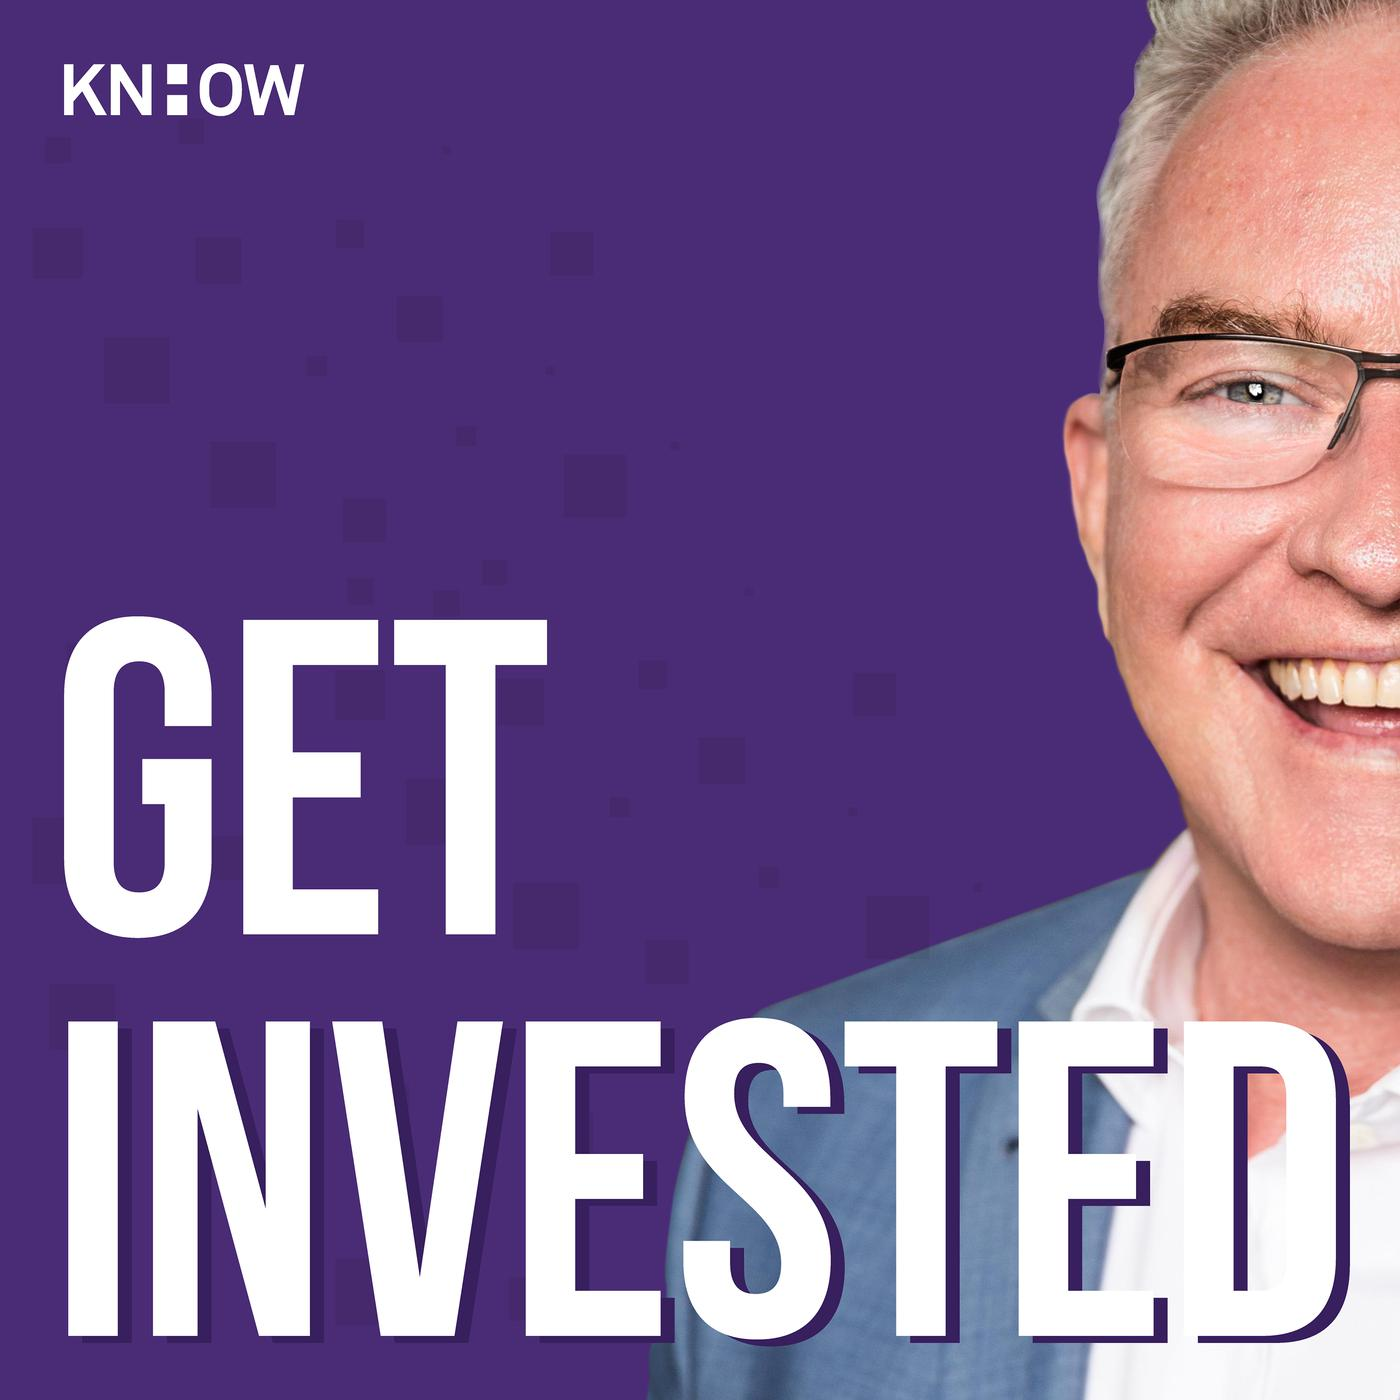 Get Invested: Part 1 - Max Phelps on Spending, Fast and Slow